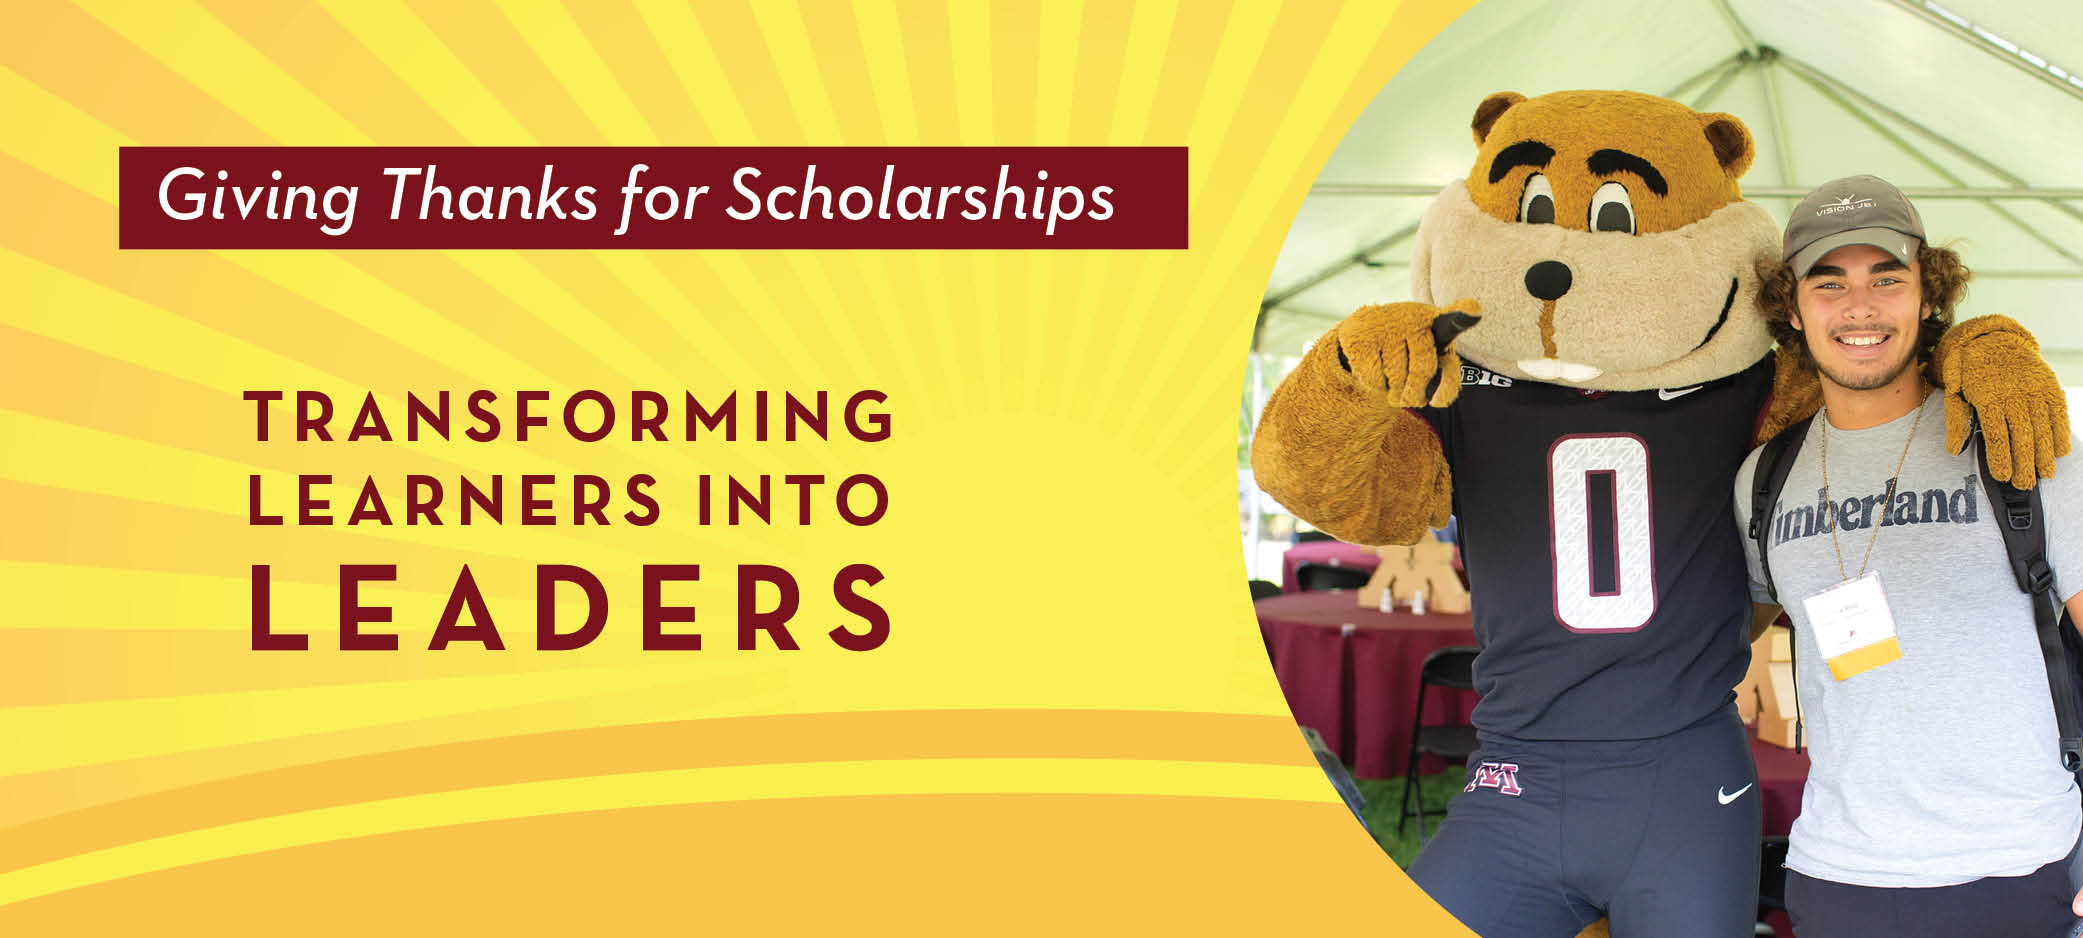 Giving Thanks for Scholarships: Transforming Learners Into Leaders graphic.